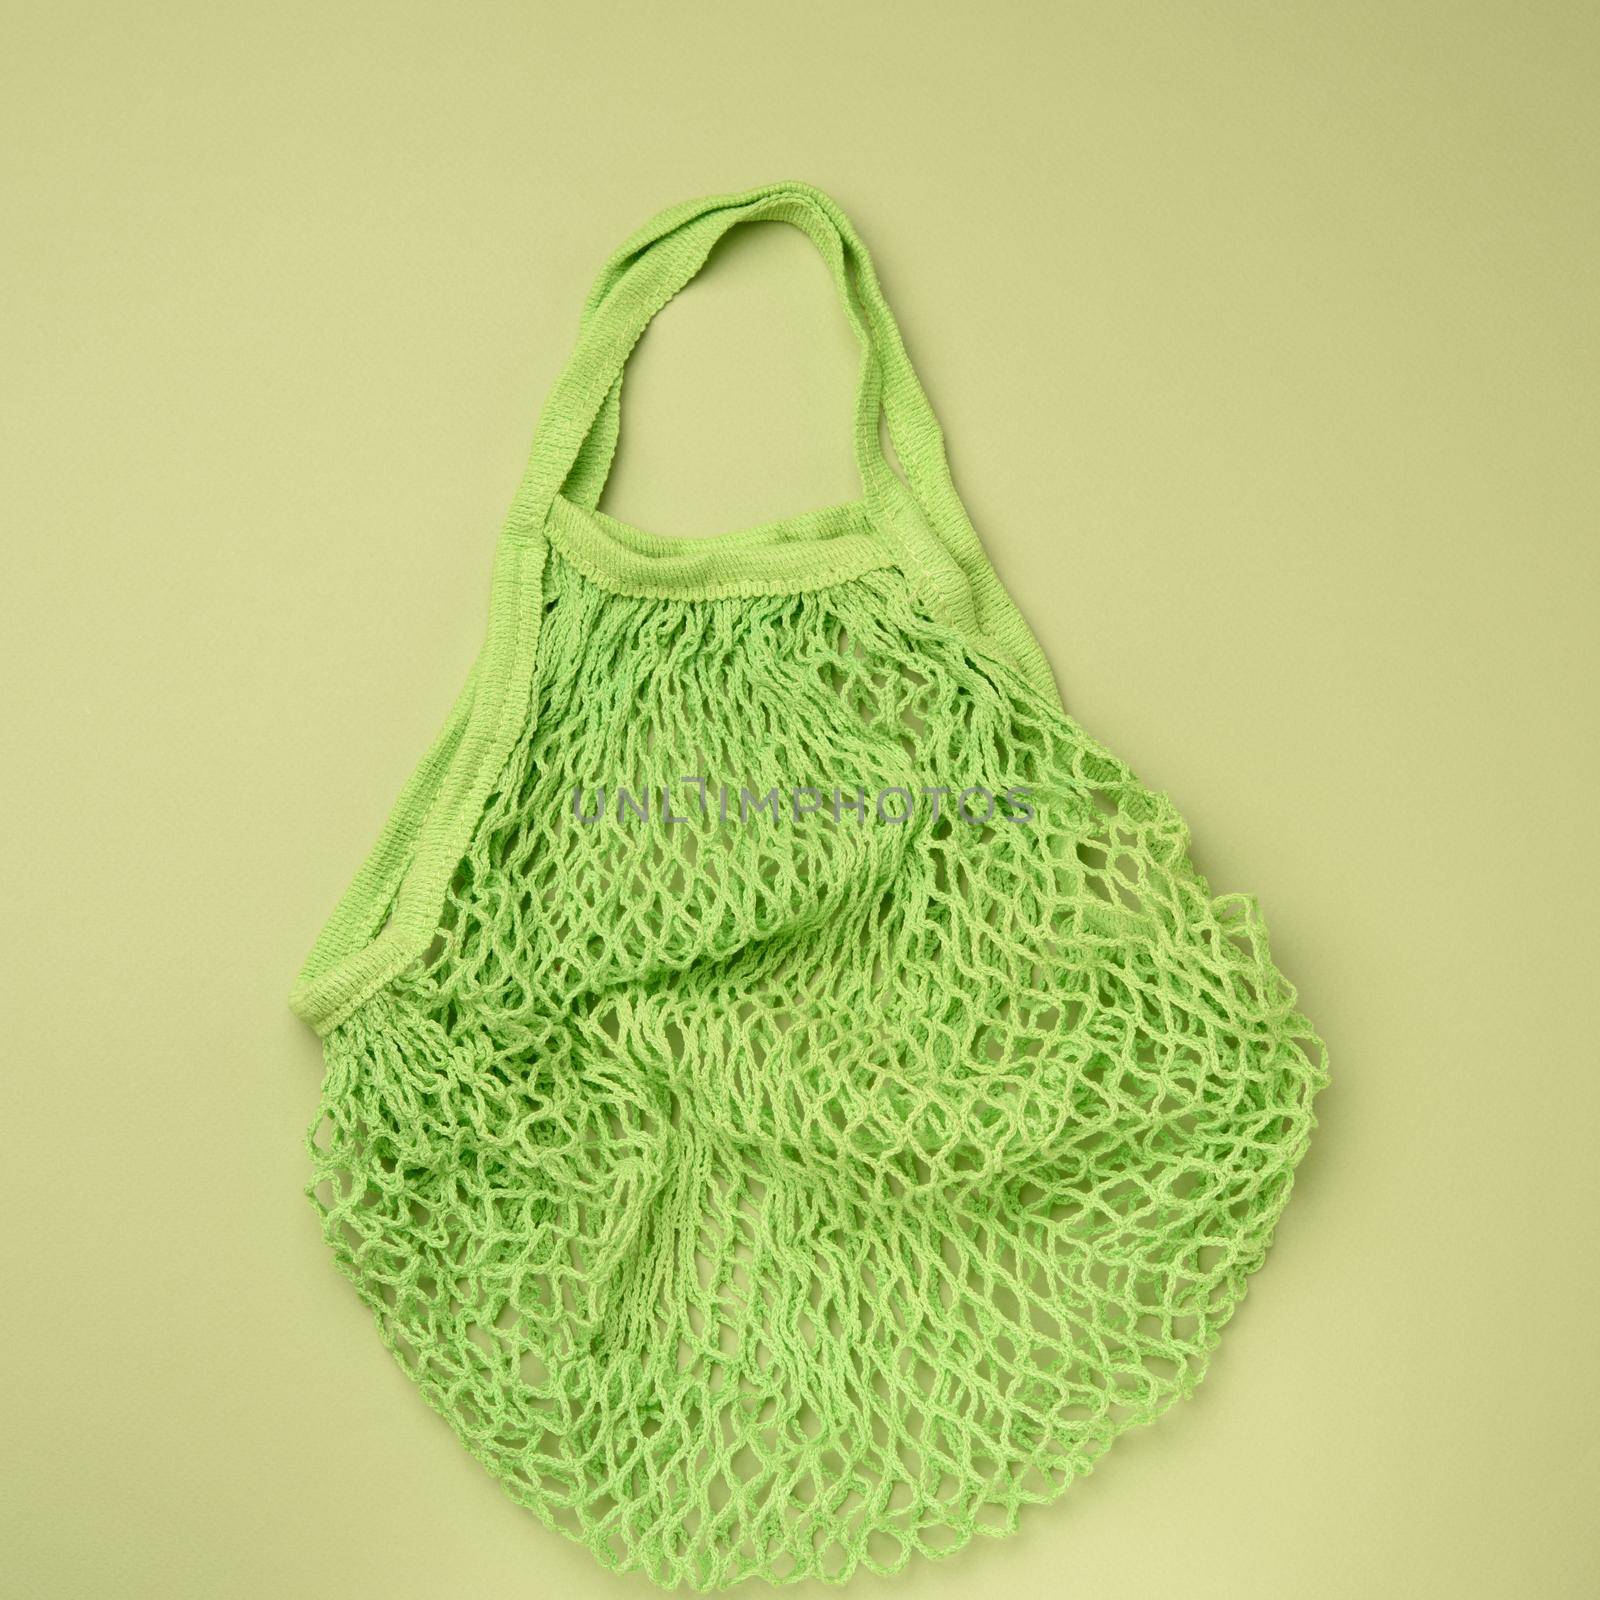 empty green reusable string bag woven from thread on a green background, zero waste